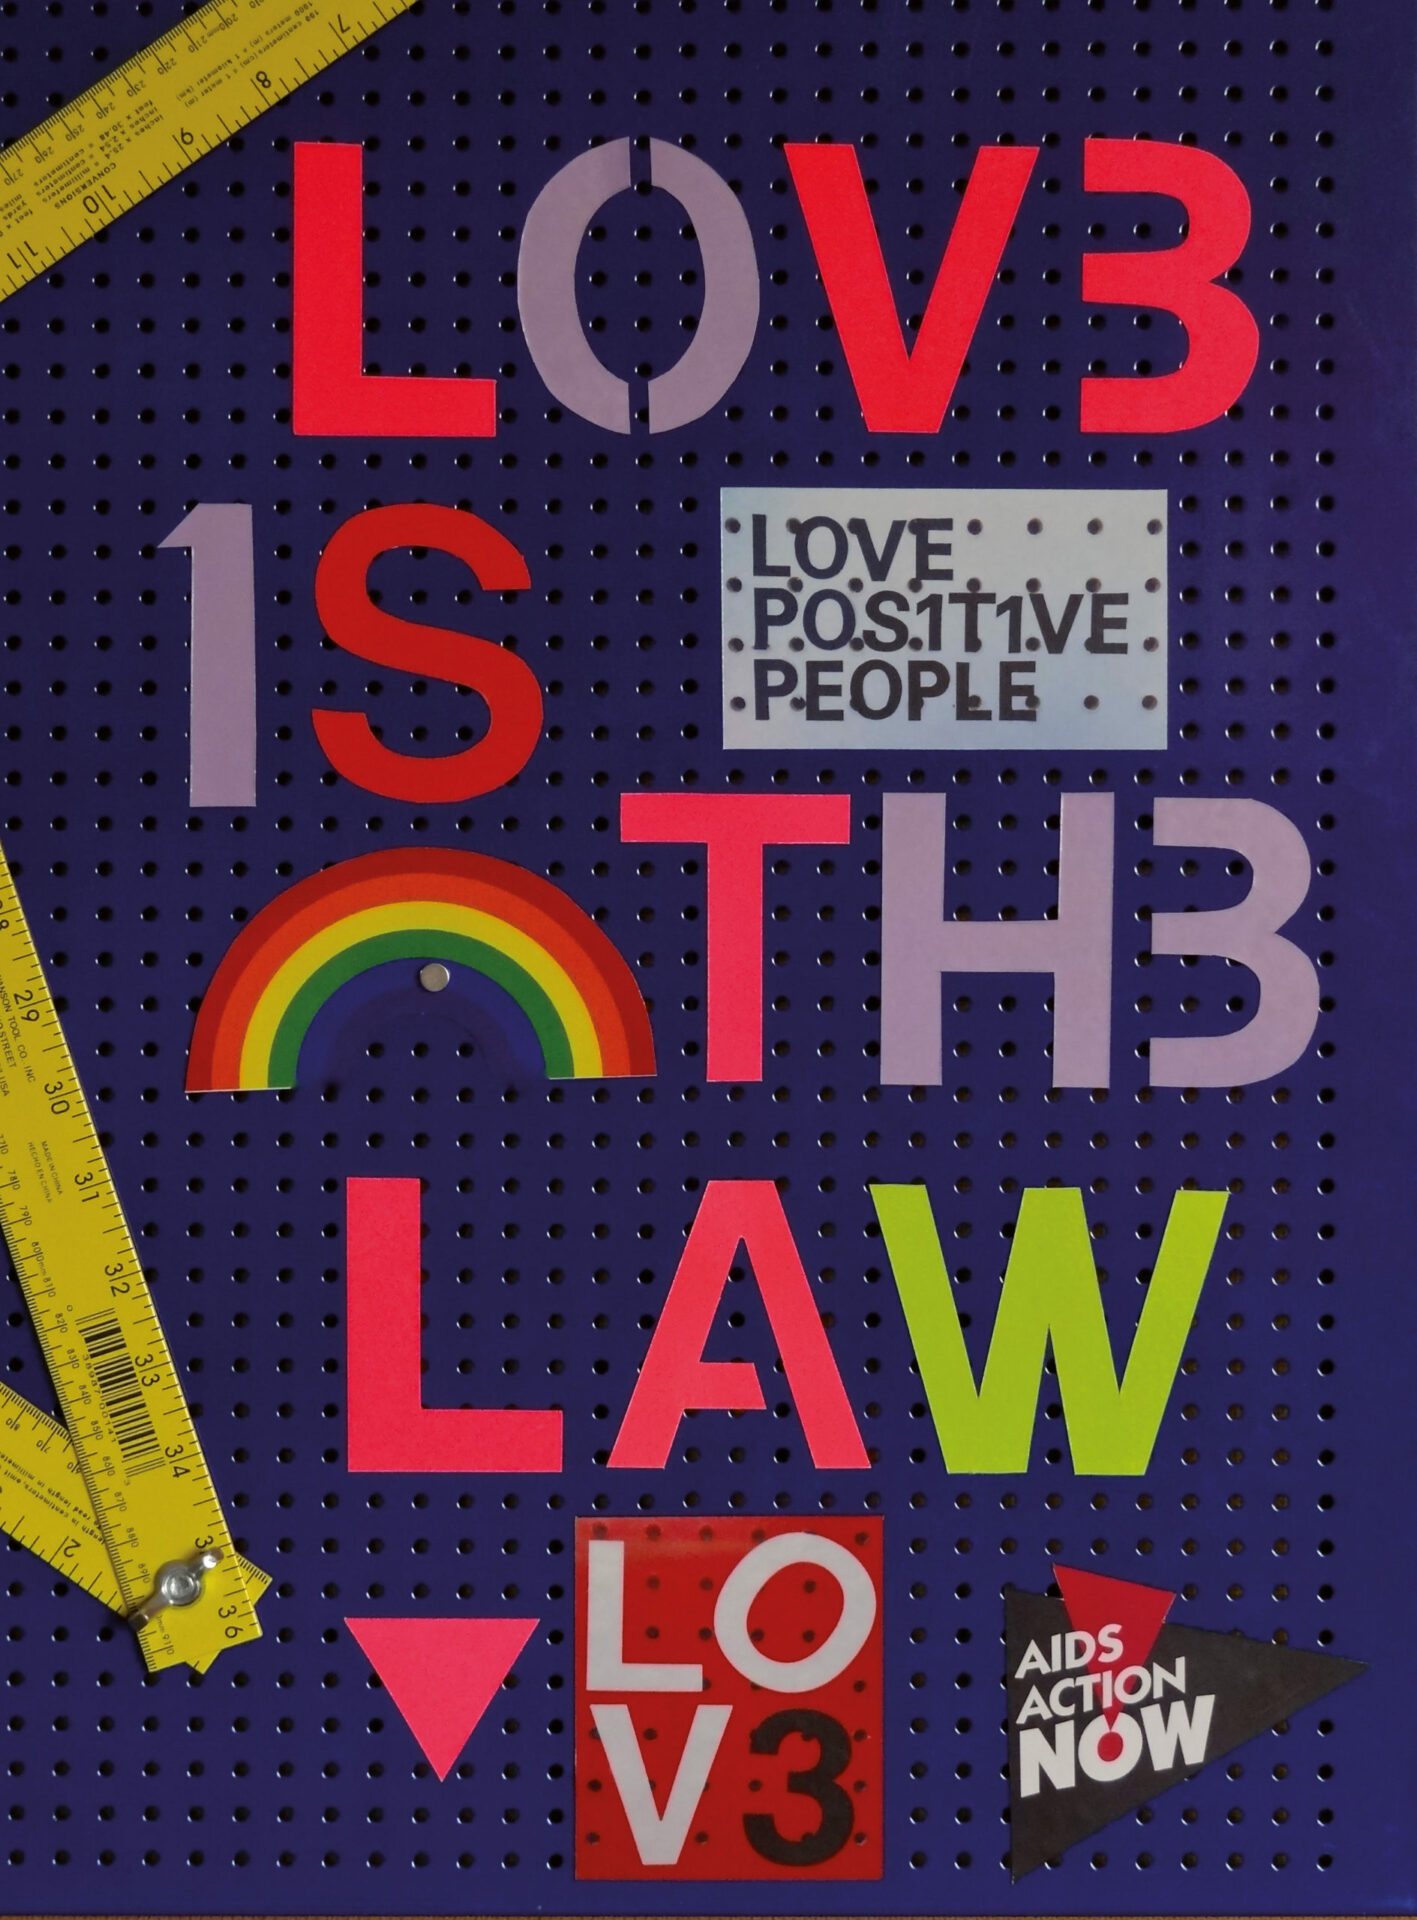 Love is the law, PosterVirus